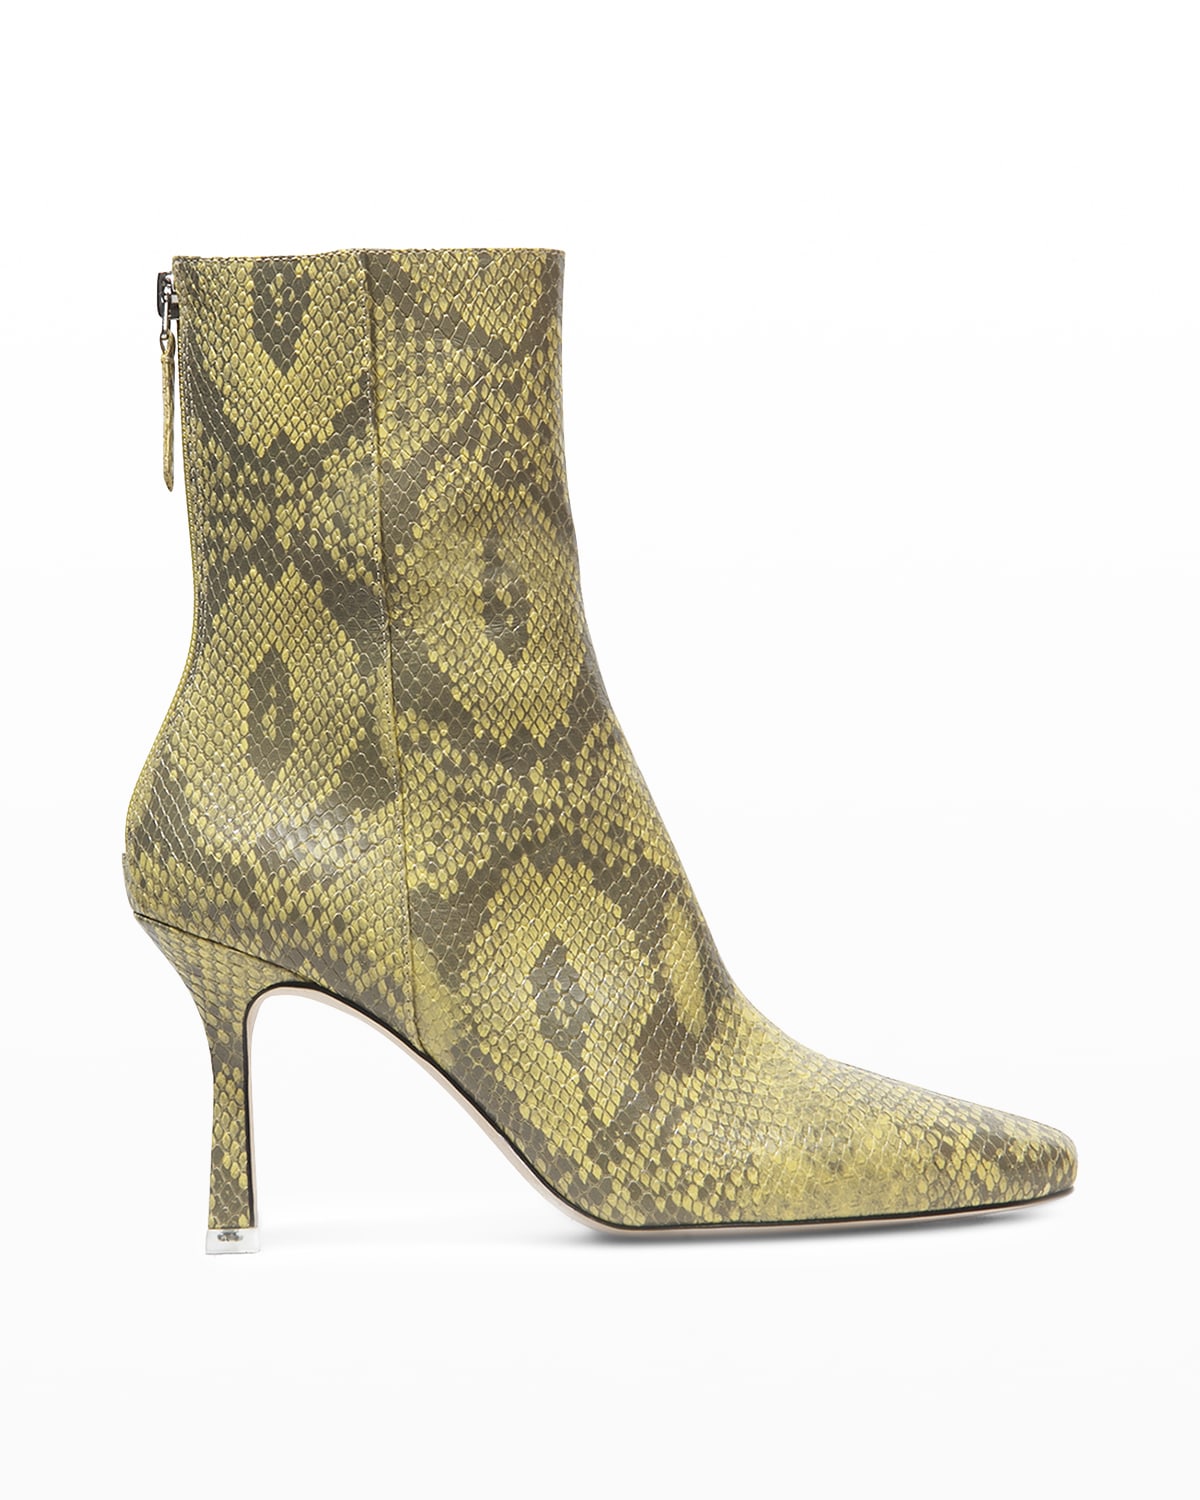 Leather Python Shoes | Neiman Marcus